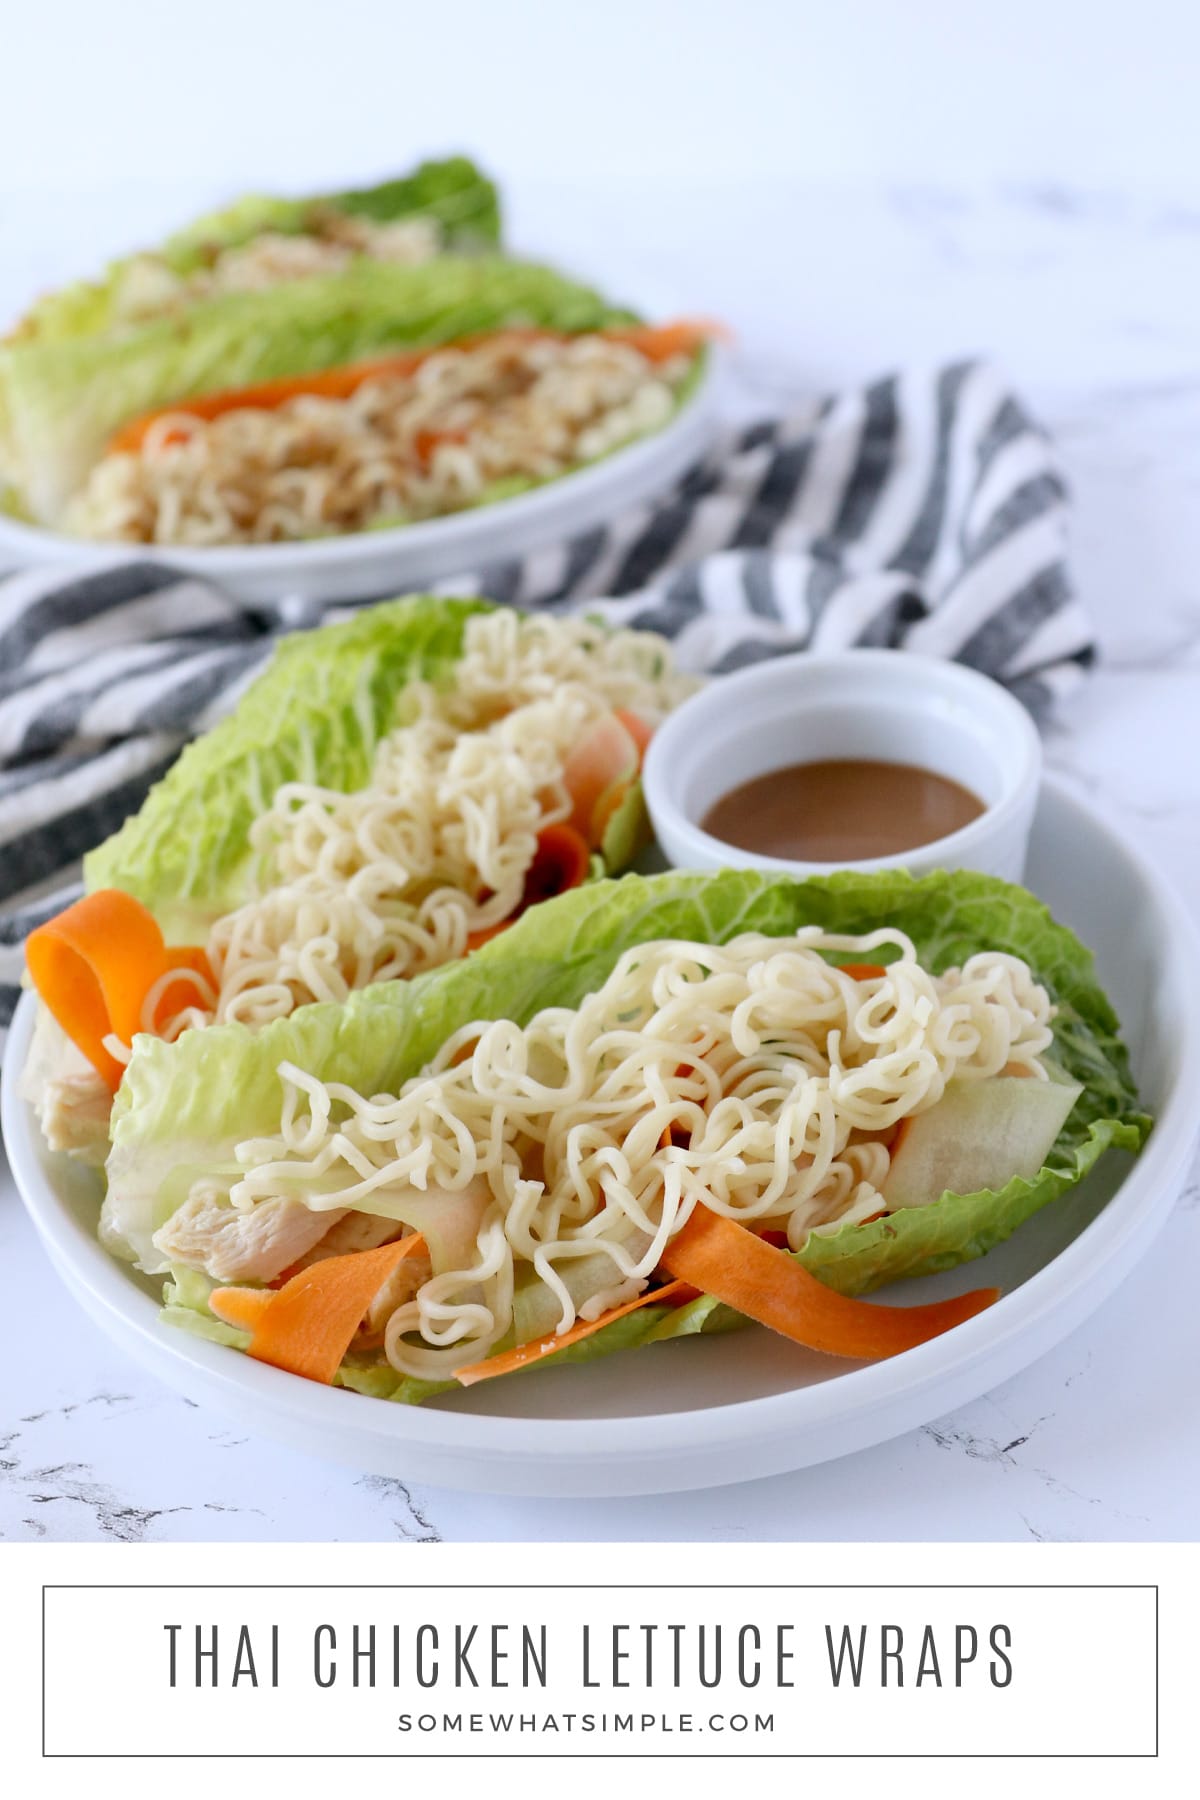 Thai Lettuce Wraps are a great way to use fresh ingredients and lean protein to make a light and flavorful meal. They're deliciously quick and easy to make as an appetizer or main dish. via @somewhatsimple